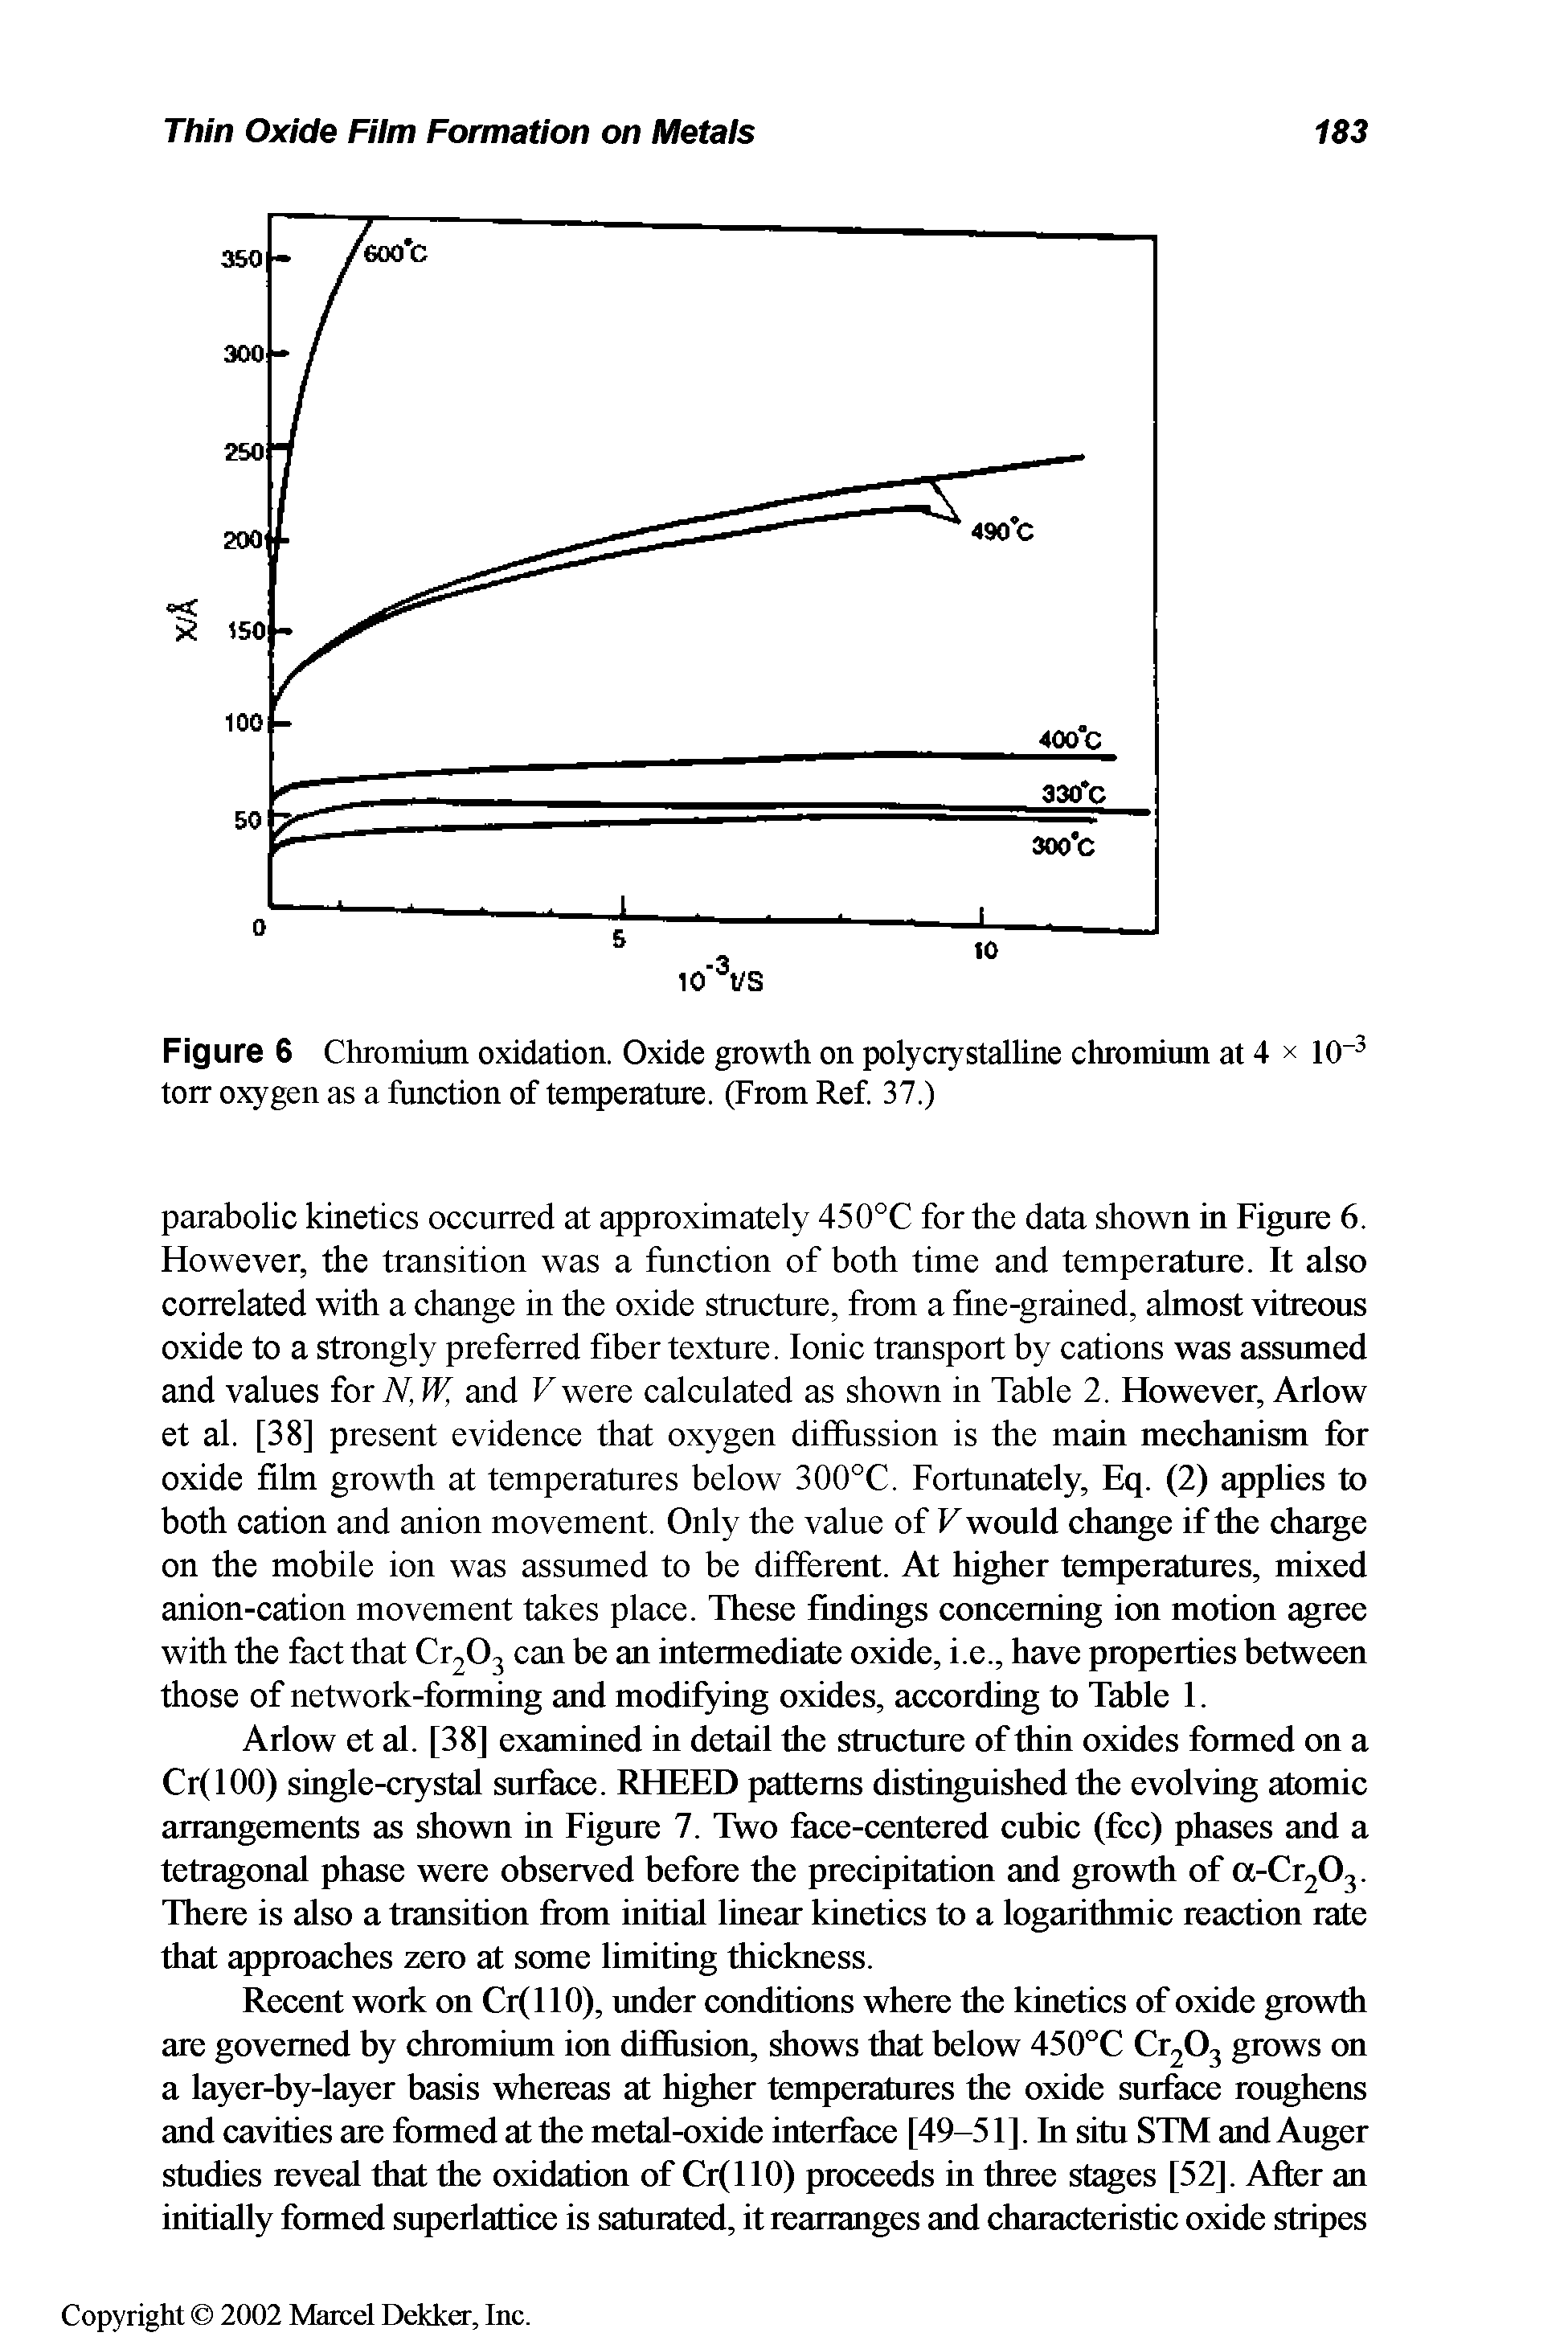 Figure 6 Chromium oxidation. Oxide growth on polycrystalline chromium at 4 x 10 torr oxygen as a function of temperature. (From Ref. 37.)...